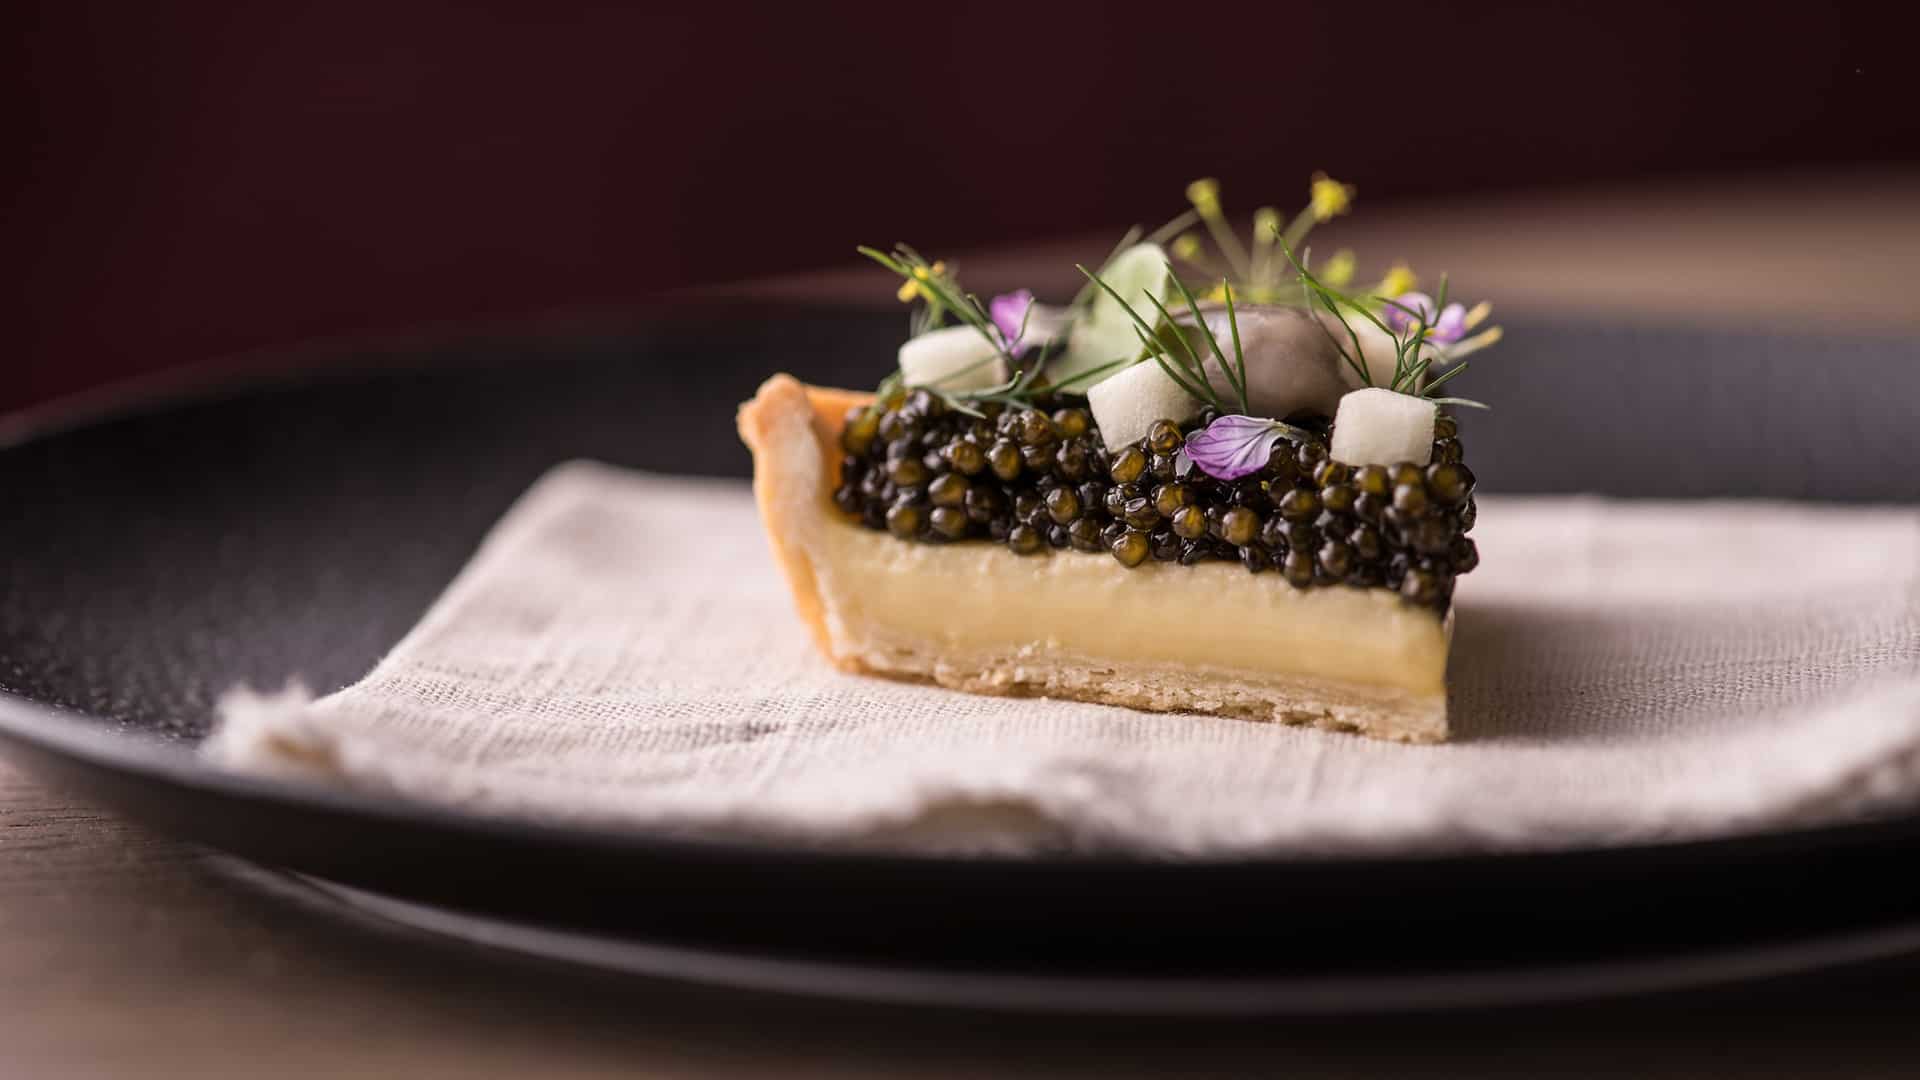 The Oyster Caviar Pie